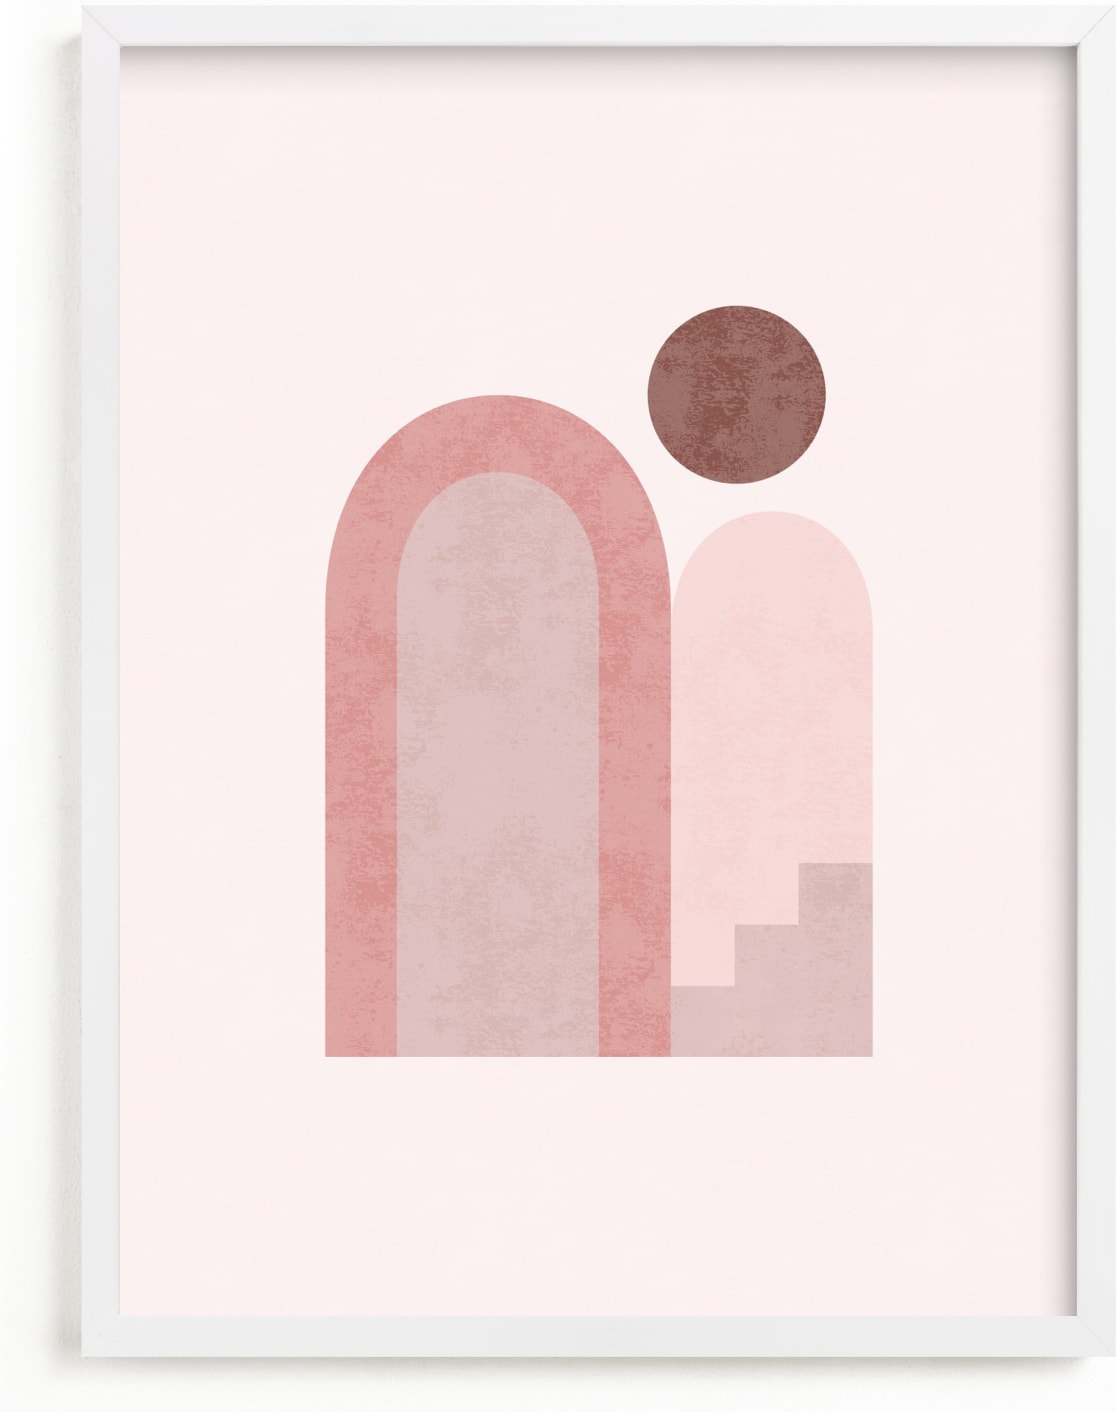 This is a pink art by Iveta Angelova called Rustic Geometry 2.